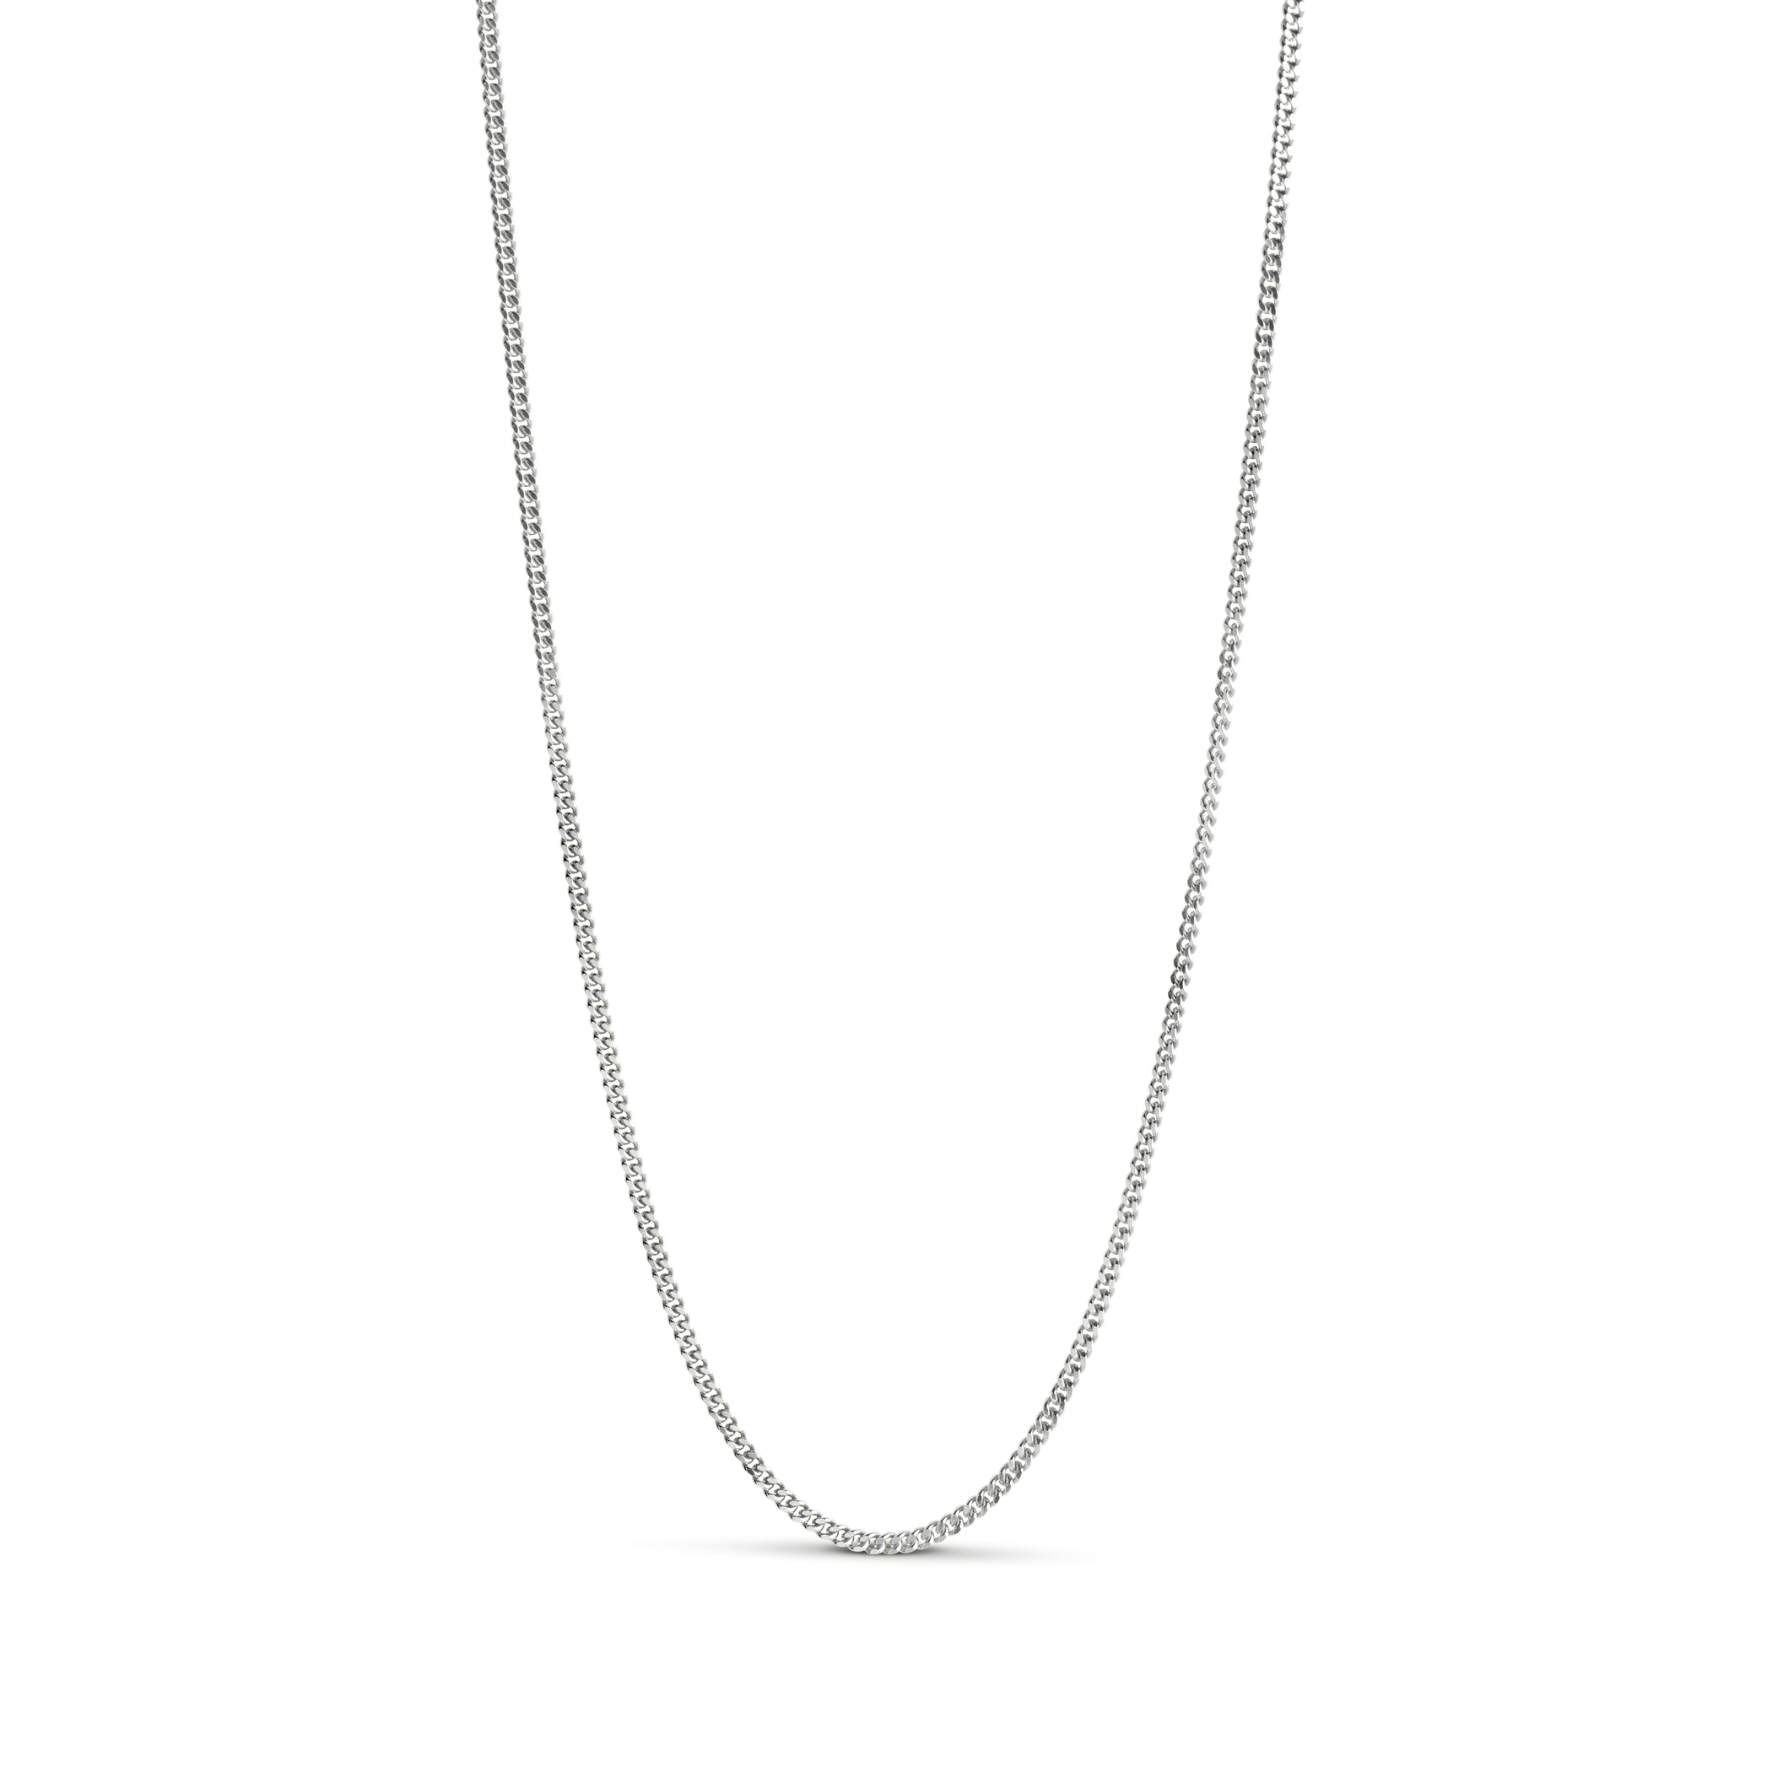 Curb Chain Necklace - 1,75 mm